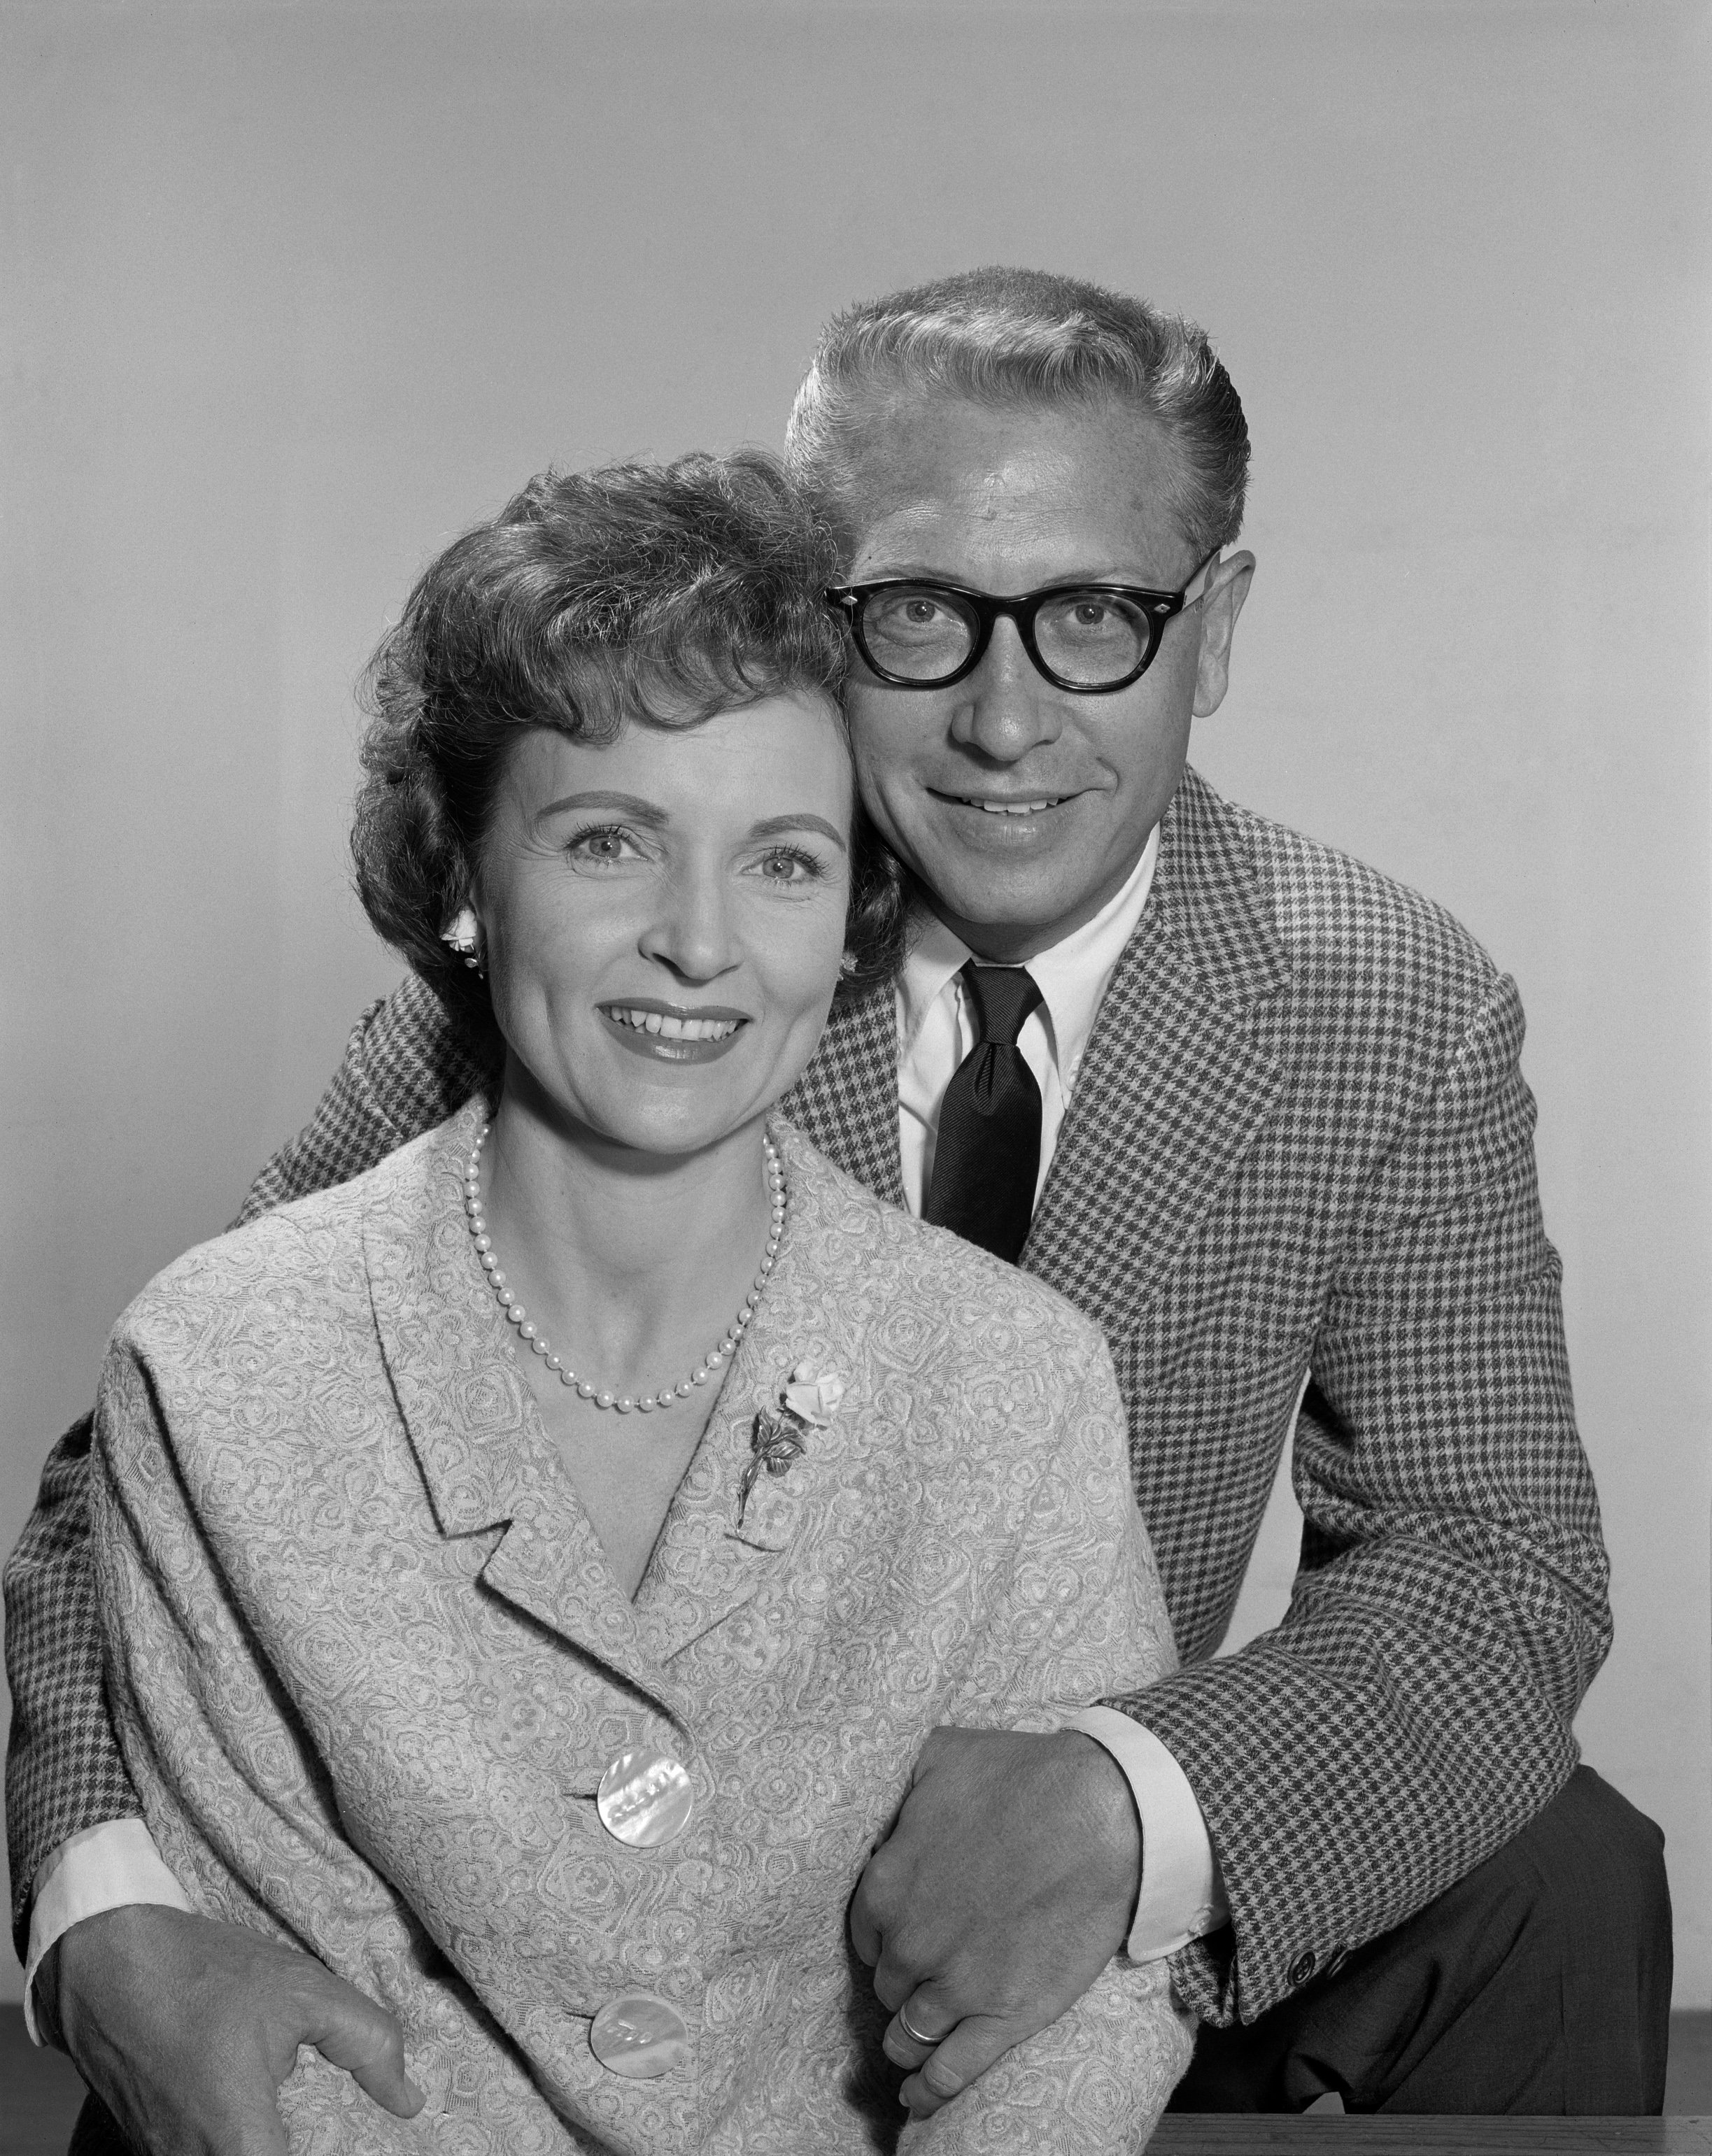 Betty White and Allen Ludden in New York in 1962 | Source: Getty Images